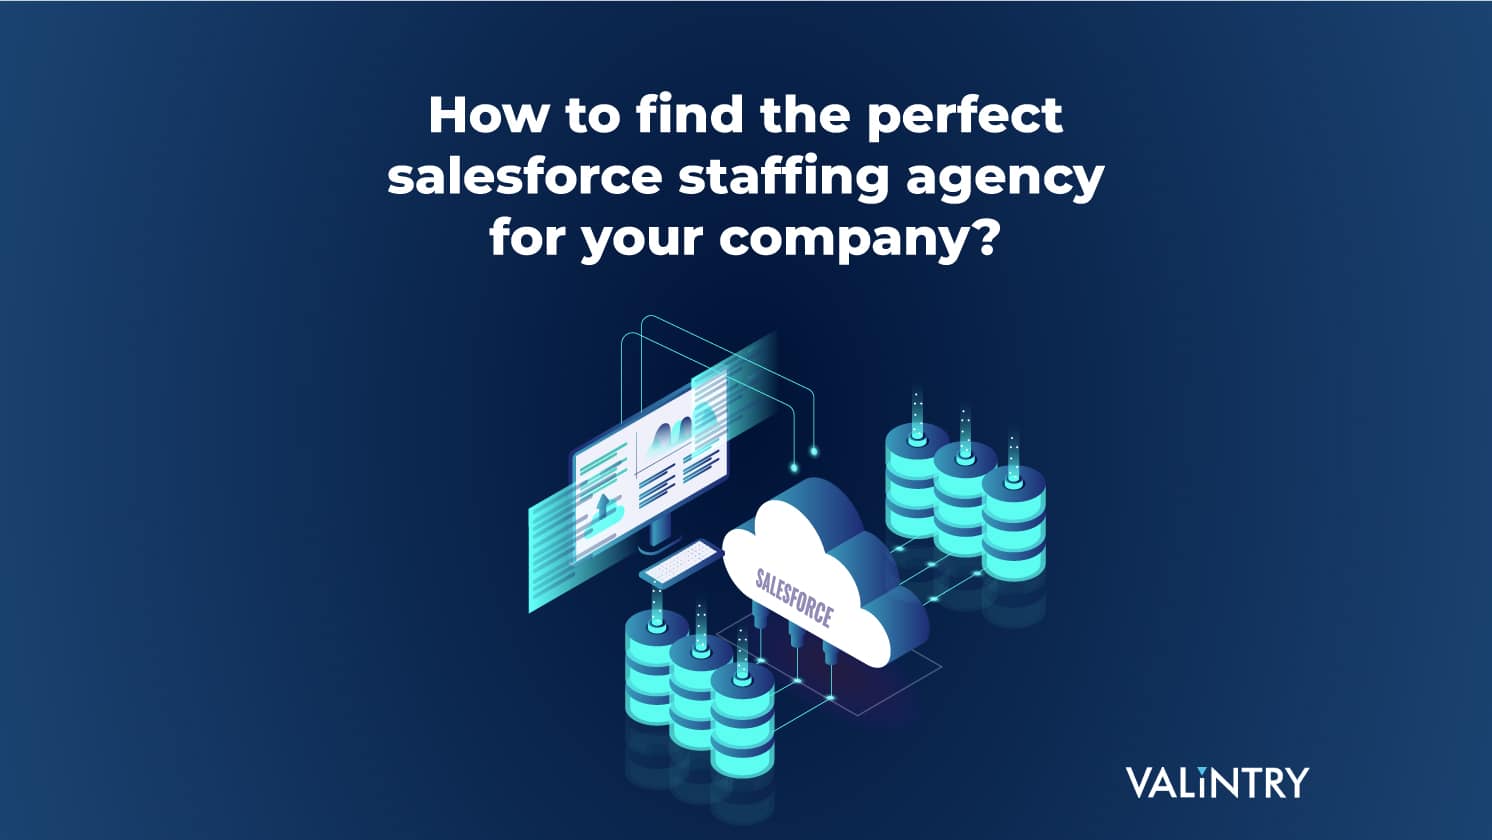 How to Find the Perfect Salesforce Staffing Agency for Your Company?